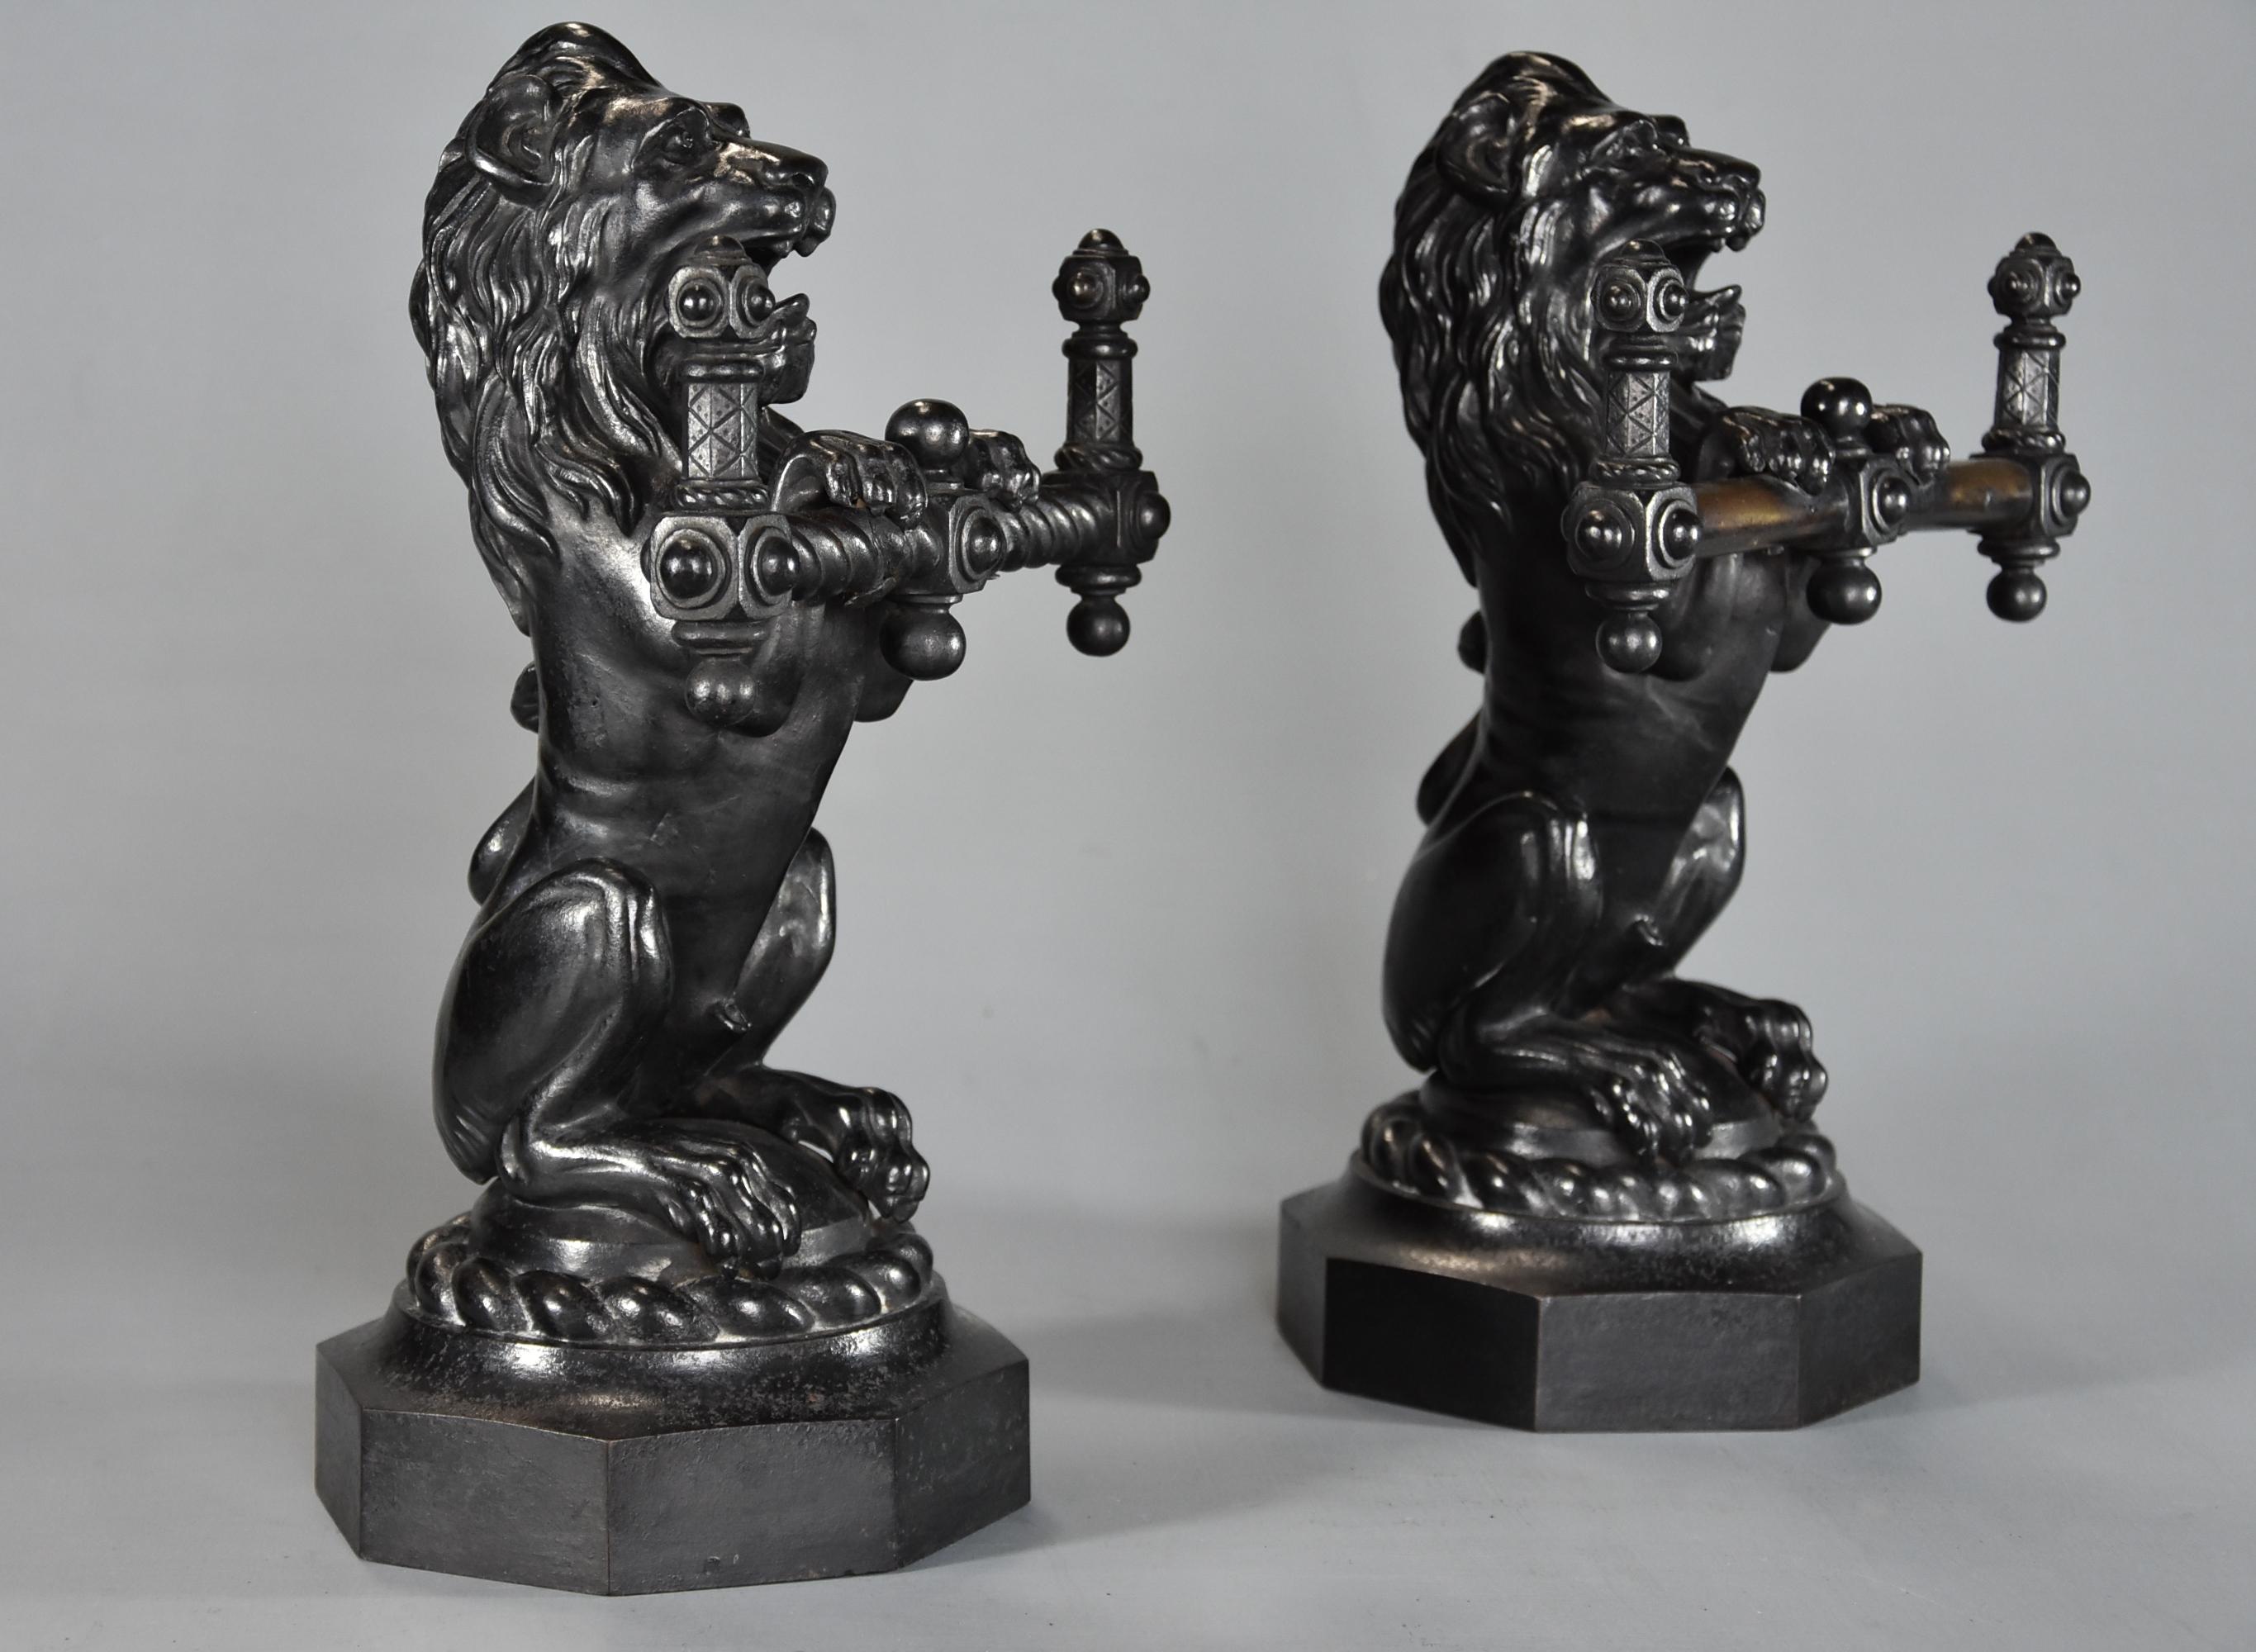 Pair of Fine quality late 19th century cast iron fire dogs in the form of lions.

This pair of finely cast fire dogs consist of a pair of lions seated on their hind legs with open mouths, one holding spiral twist support, the other holding plain